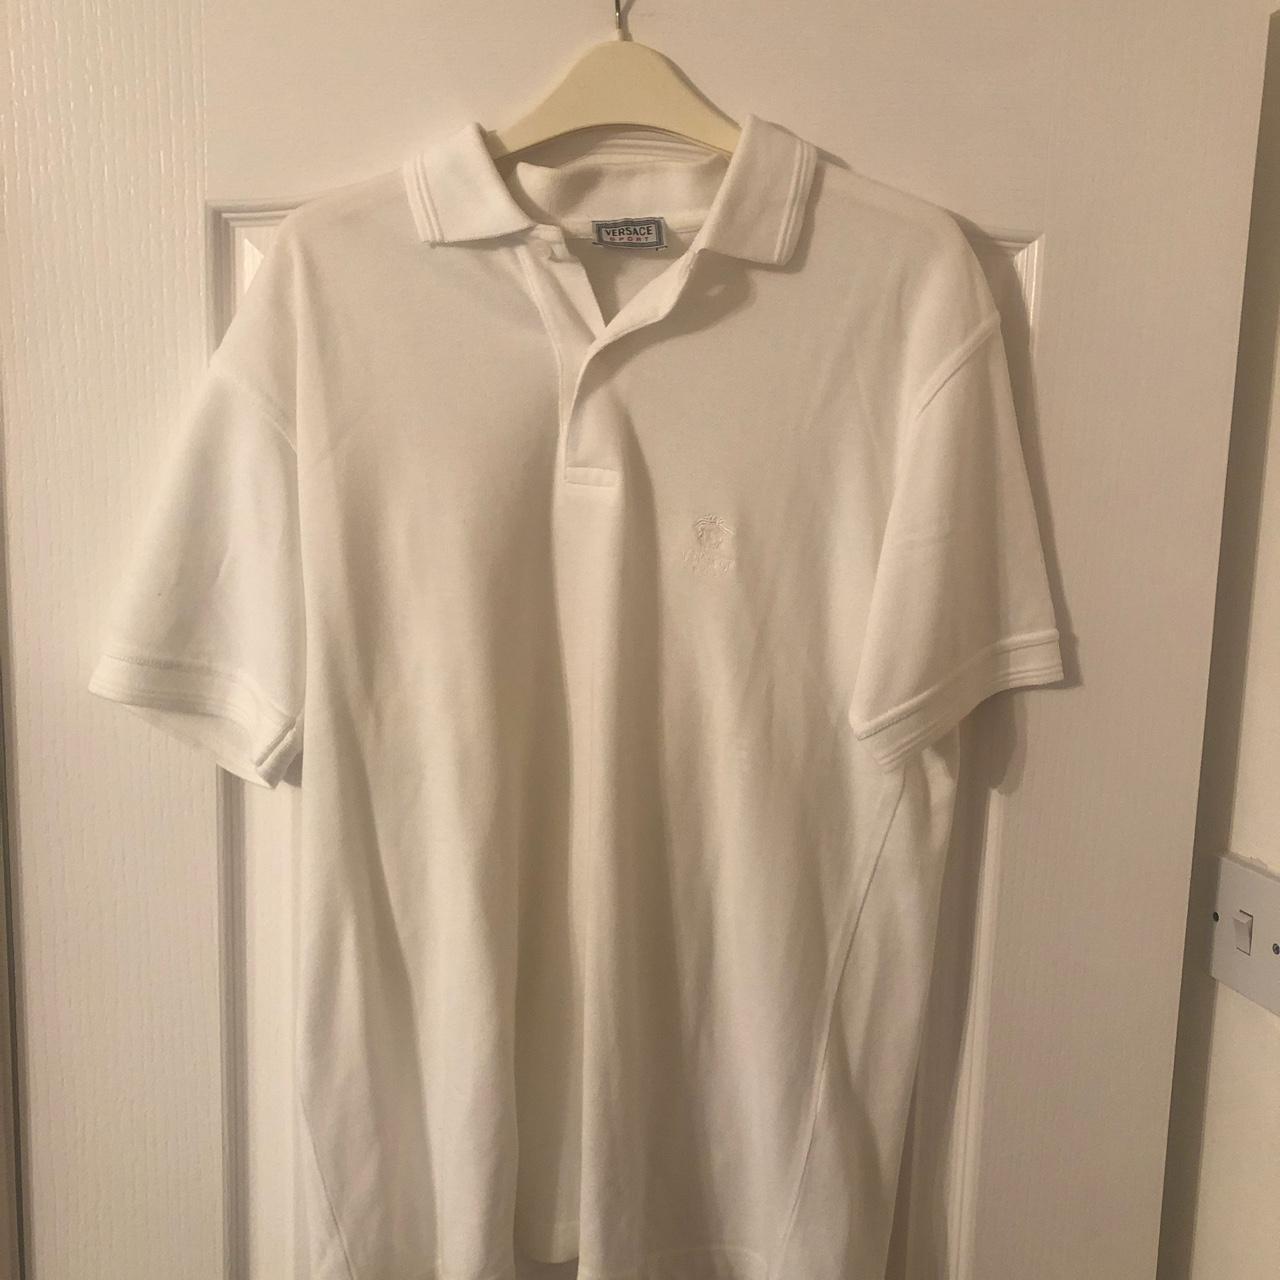 White Versace sport polo shirt Great condition size... - Depop